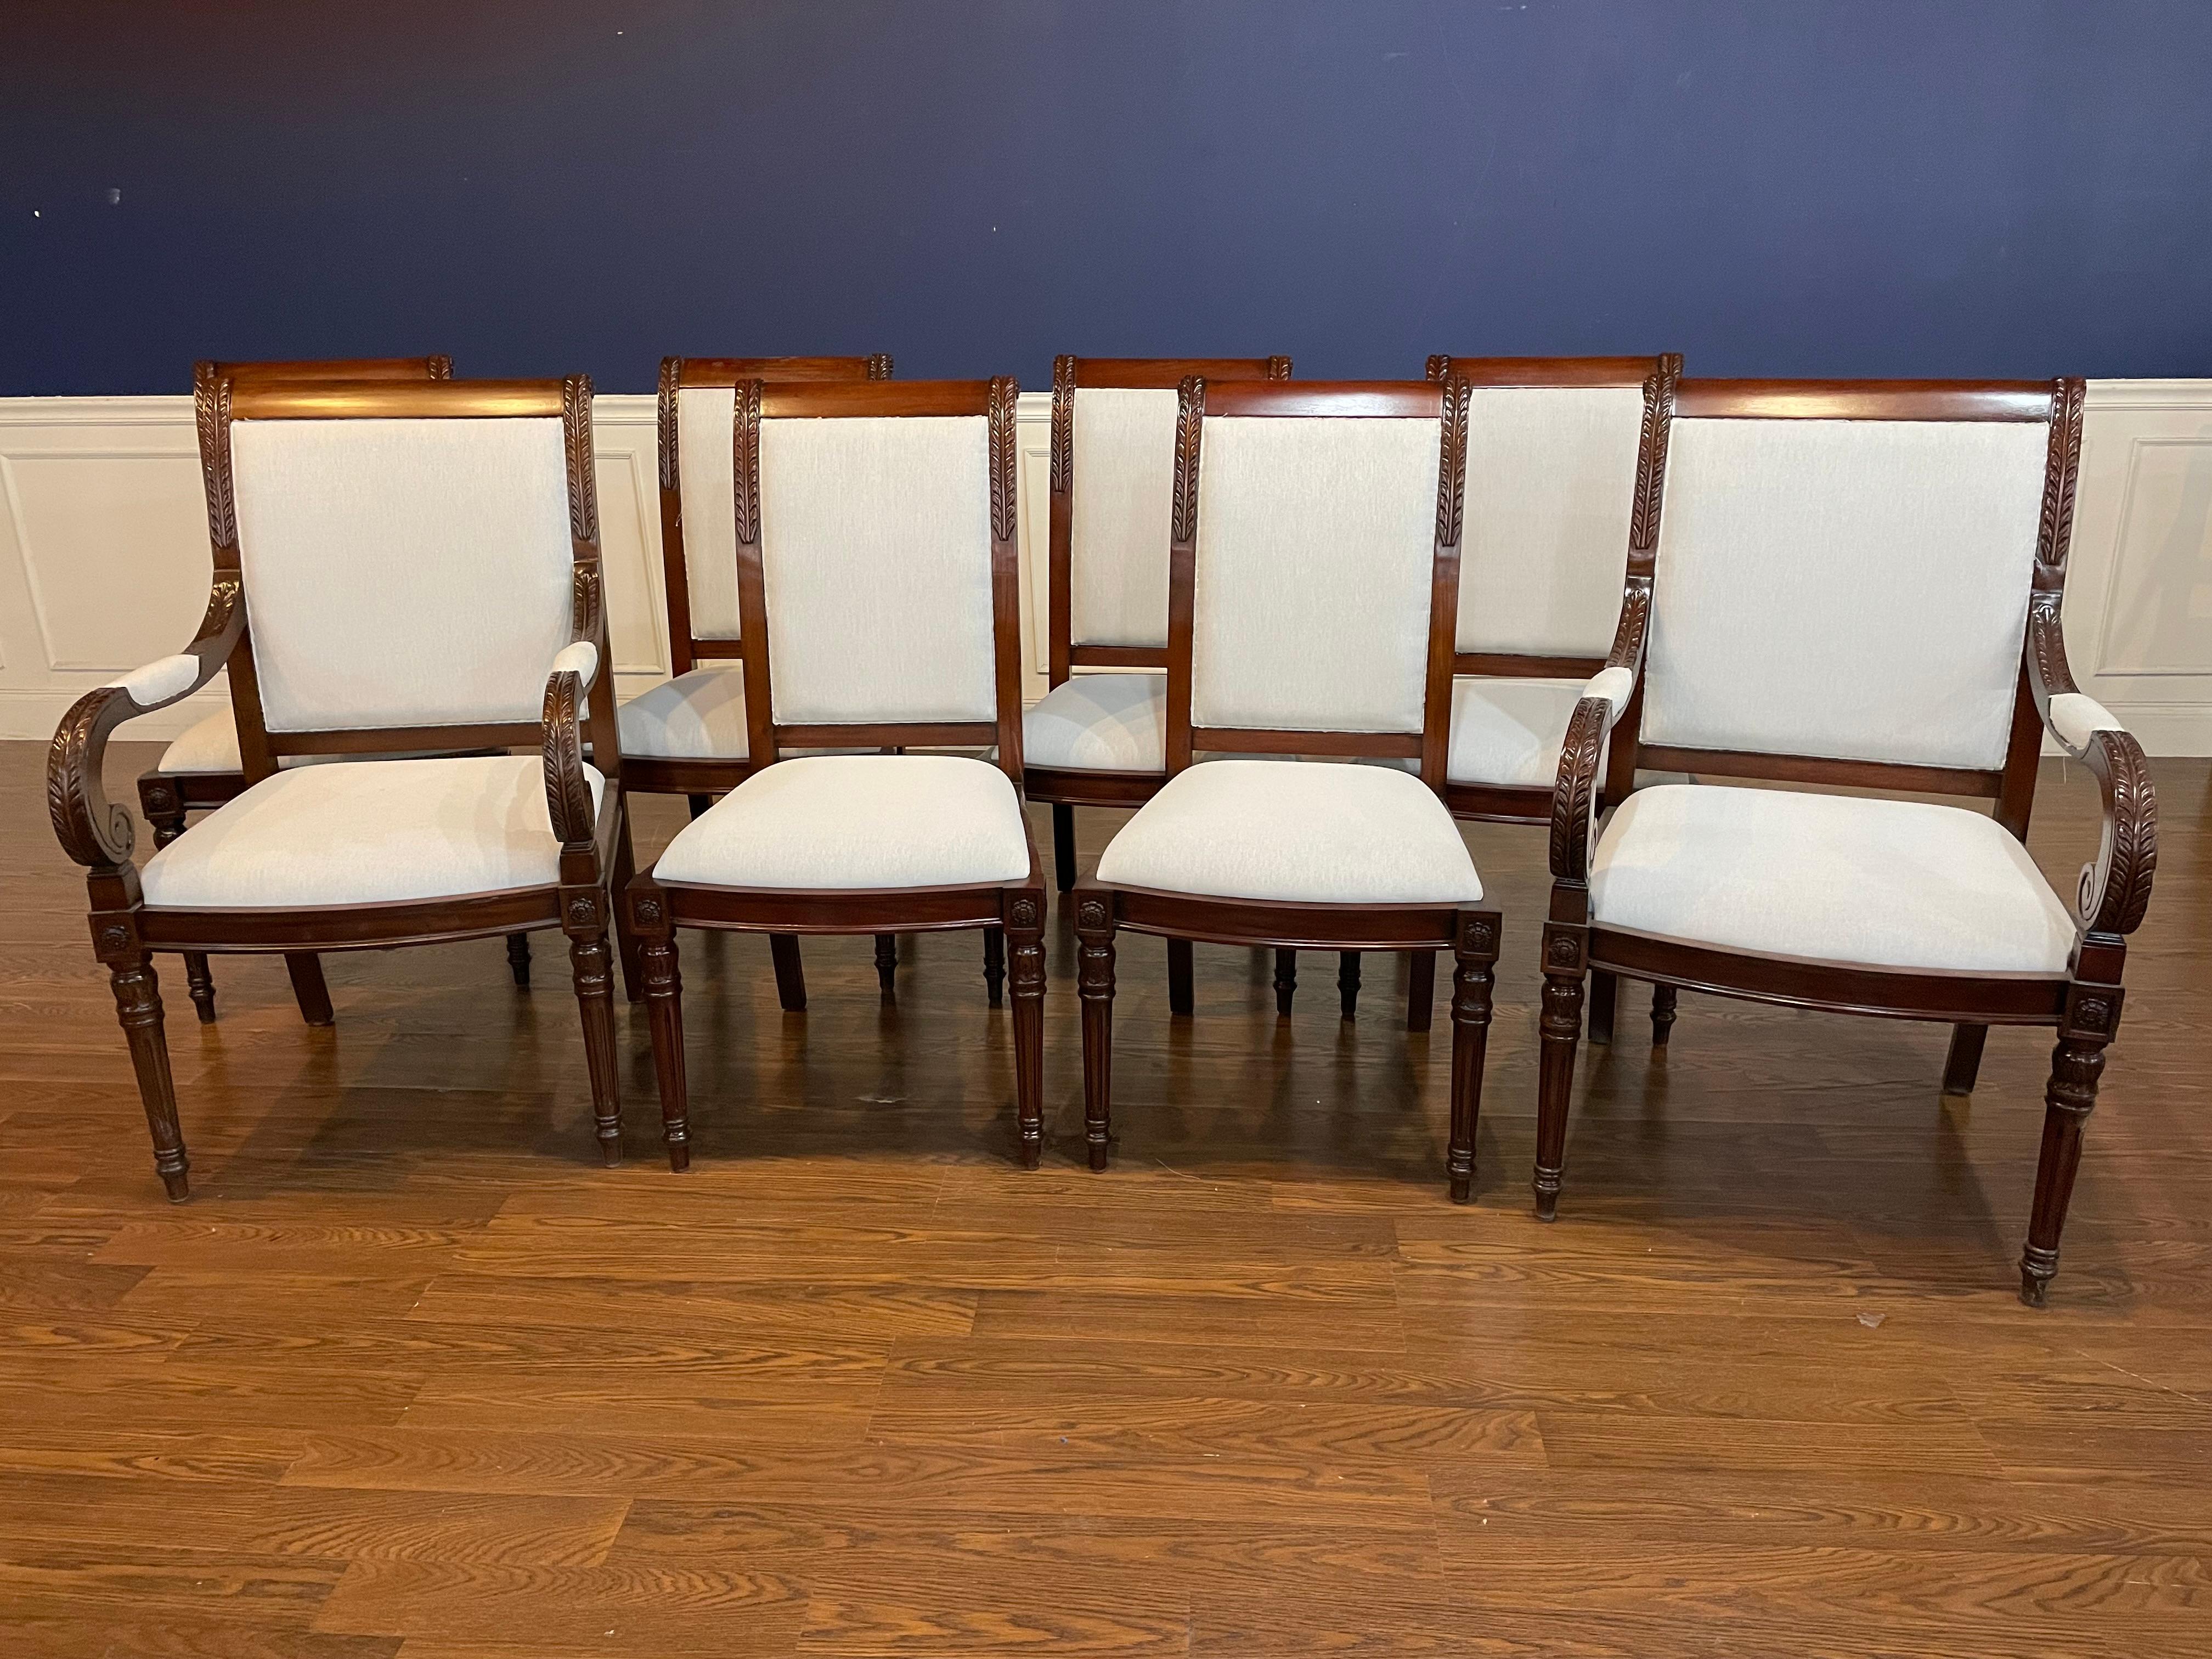 This is a set of eight ( 2 arms and 6 sides) Newport mahogany dining chairs by Leighton Hall. They feature acanthus leaf carvings on the backs and classic round fluted and tapered legs.  The chairs are finished in a medium brown mahogany color with